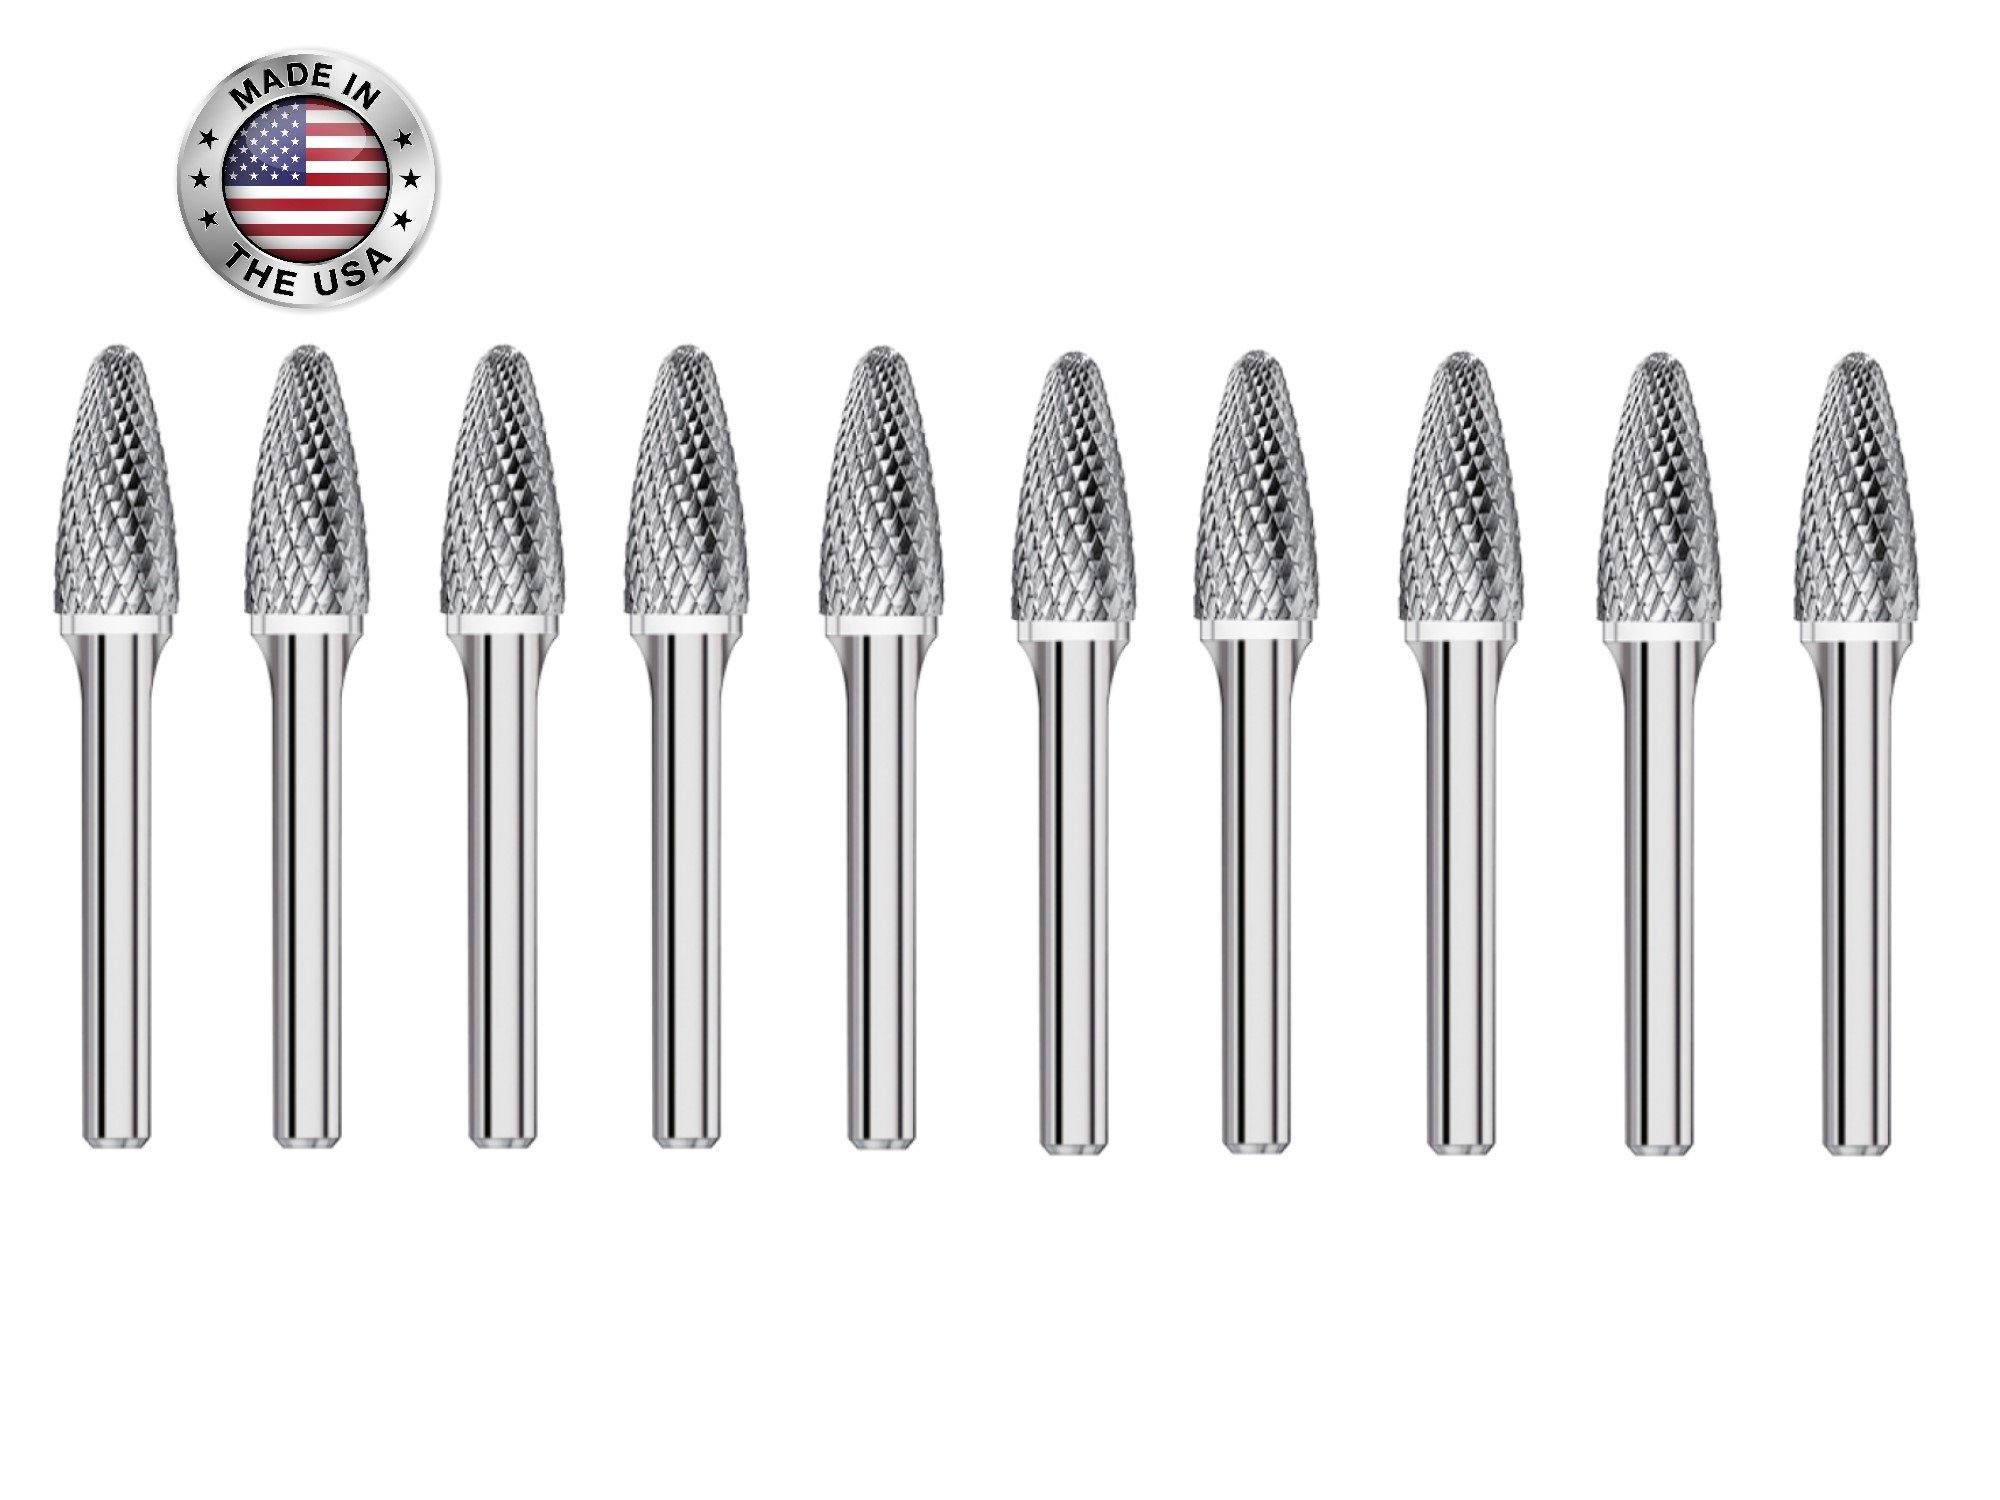 SF-5 Burr (10 Pack) 1/2" x 1" Cut Length x 2-1/4" OAL on 1/4" Shanks - The End Mill Store 